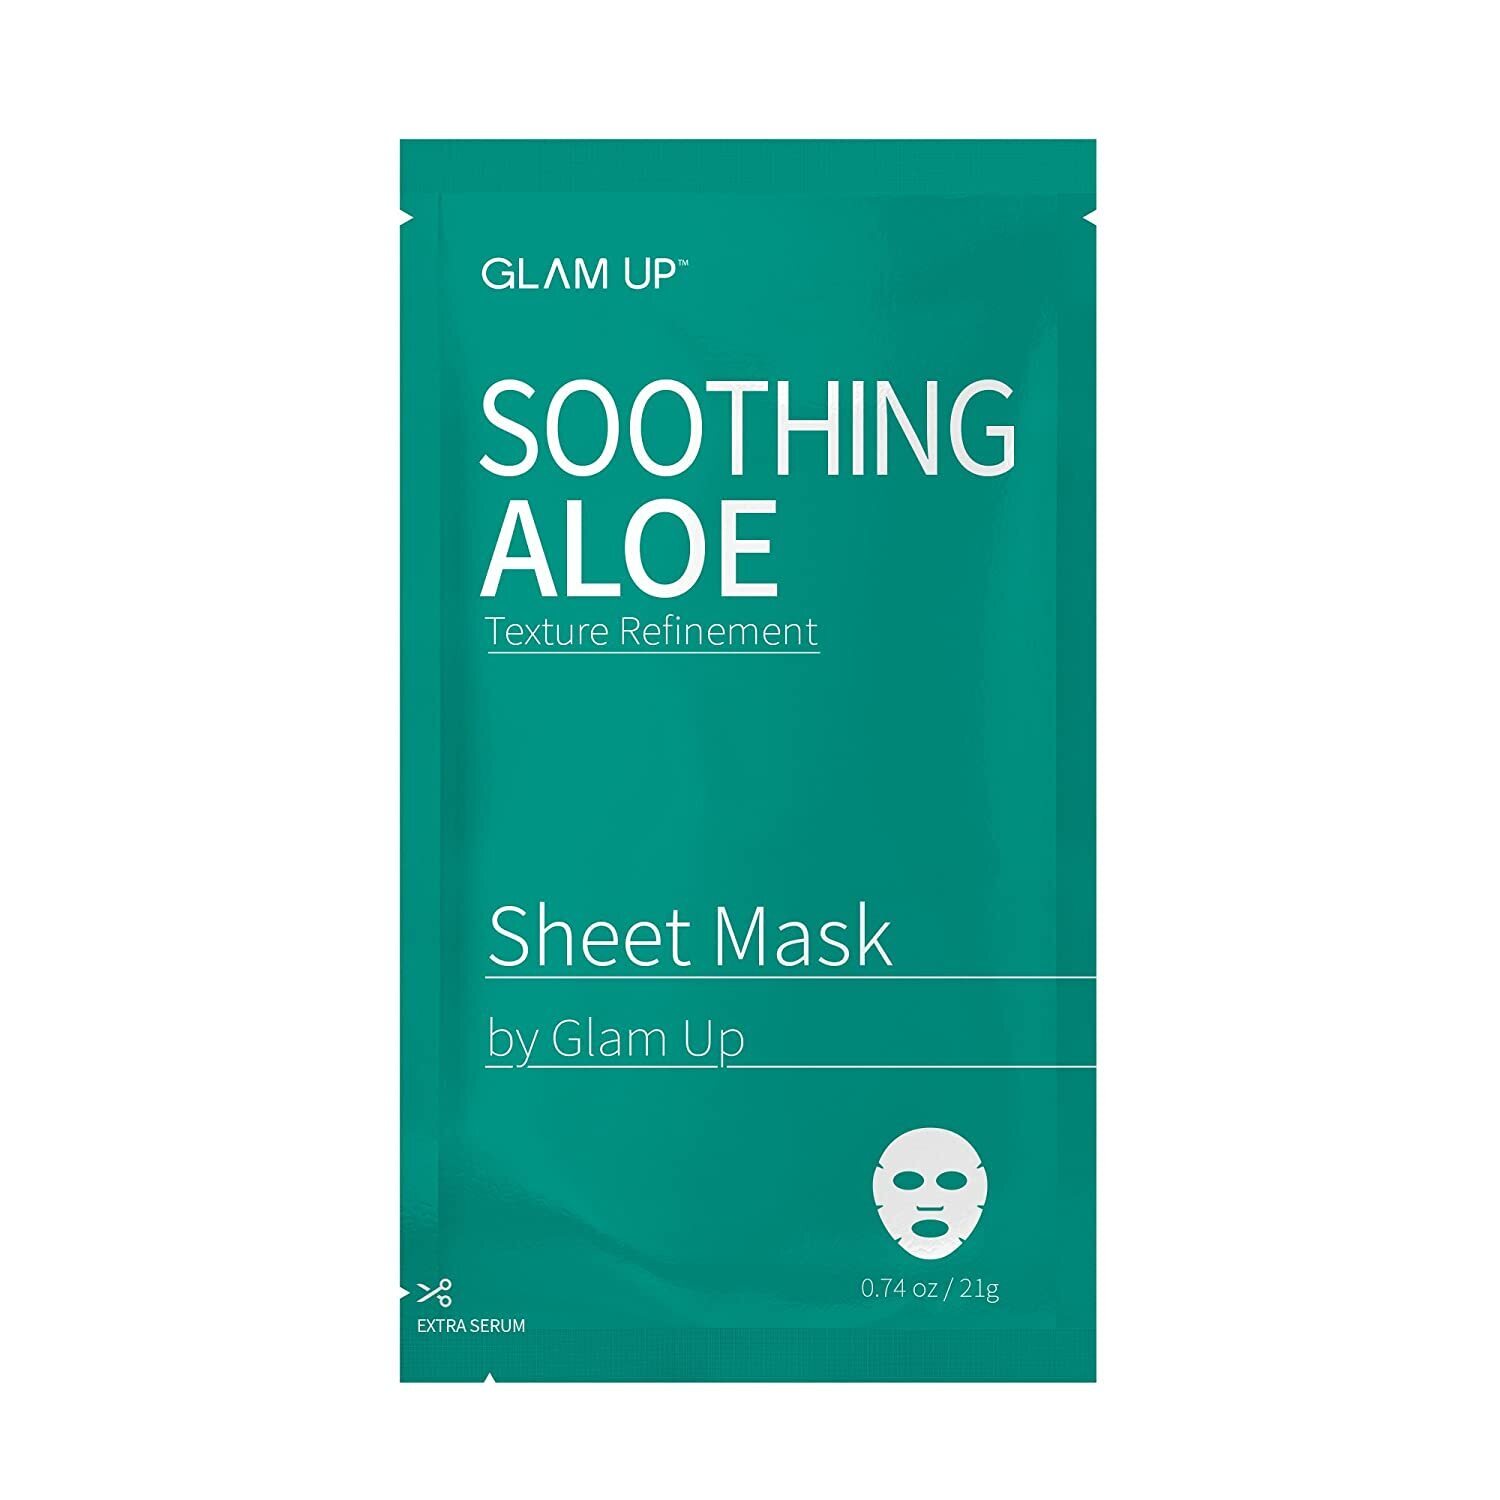 Glam Up Sheet Masks Are Great for Hydrating Dry Skin — Review